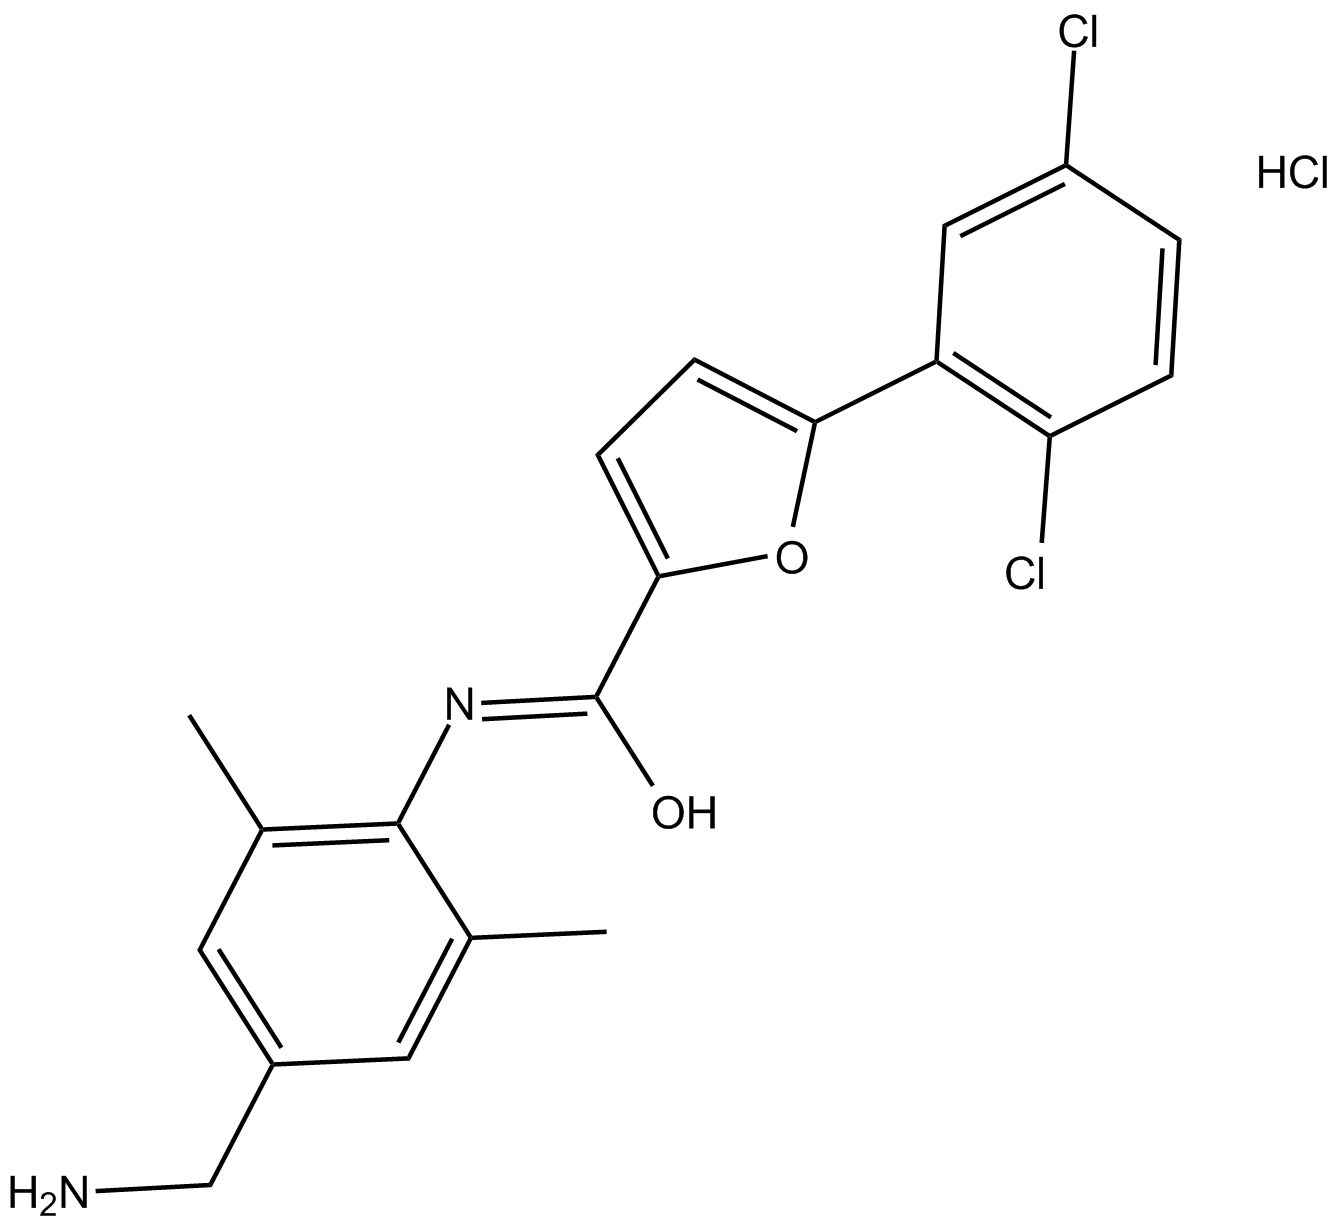 CYM 50358 hydrochloride  Chemical Structure